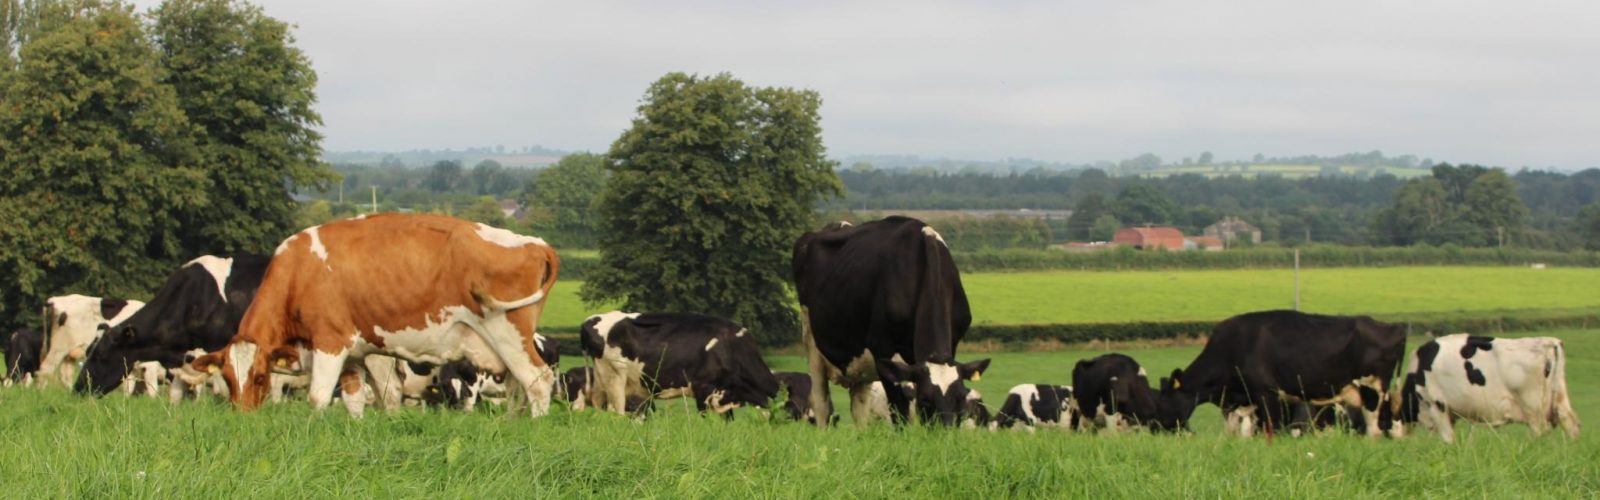 Preparing for grazing and striking the nutritional balance at grass turnout